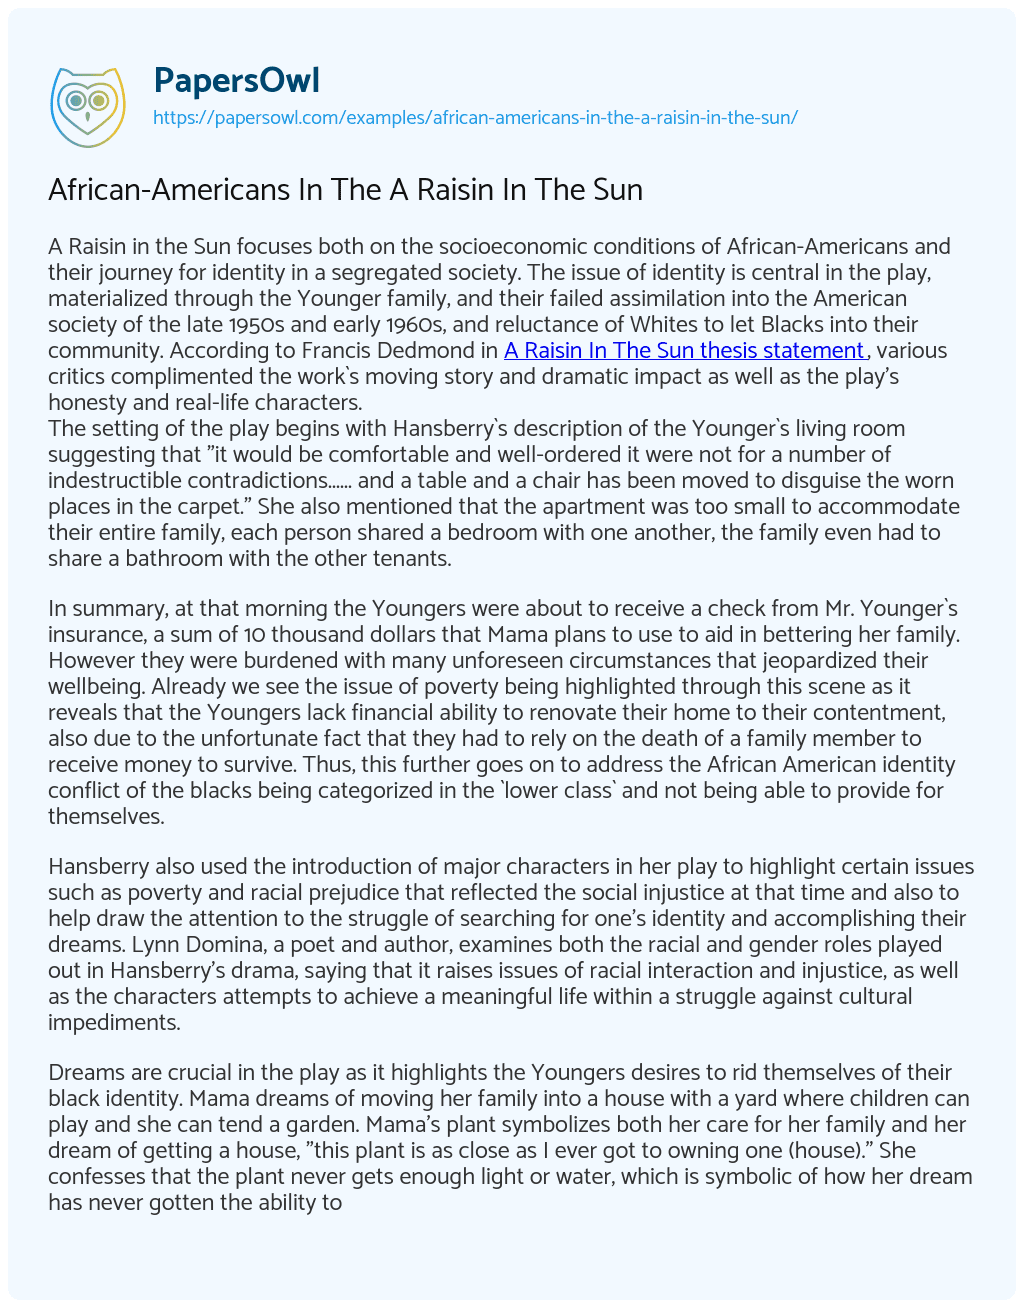 Essay on African-Americans in the a Raisin in the Sun